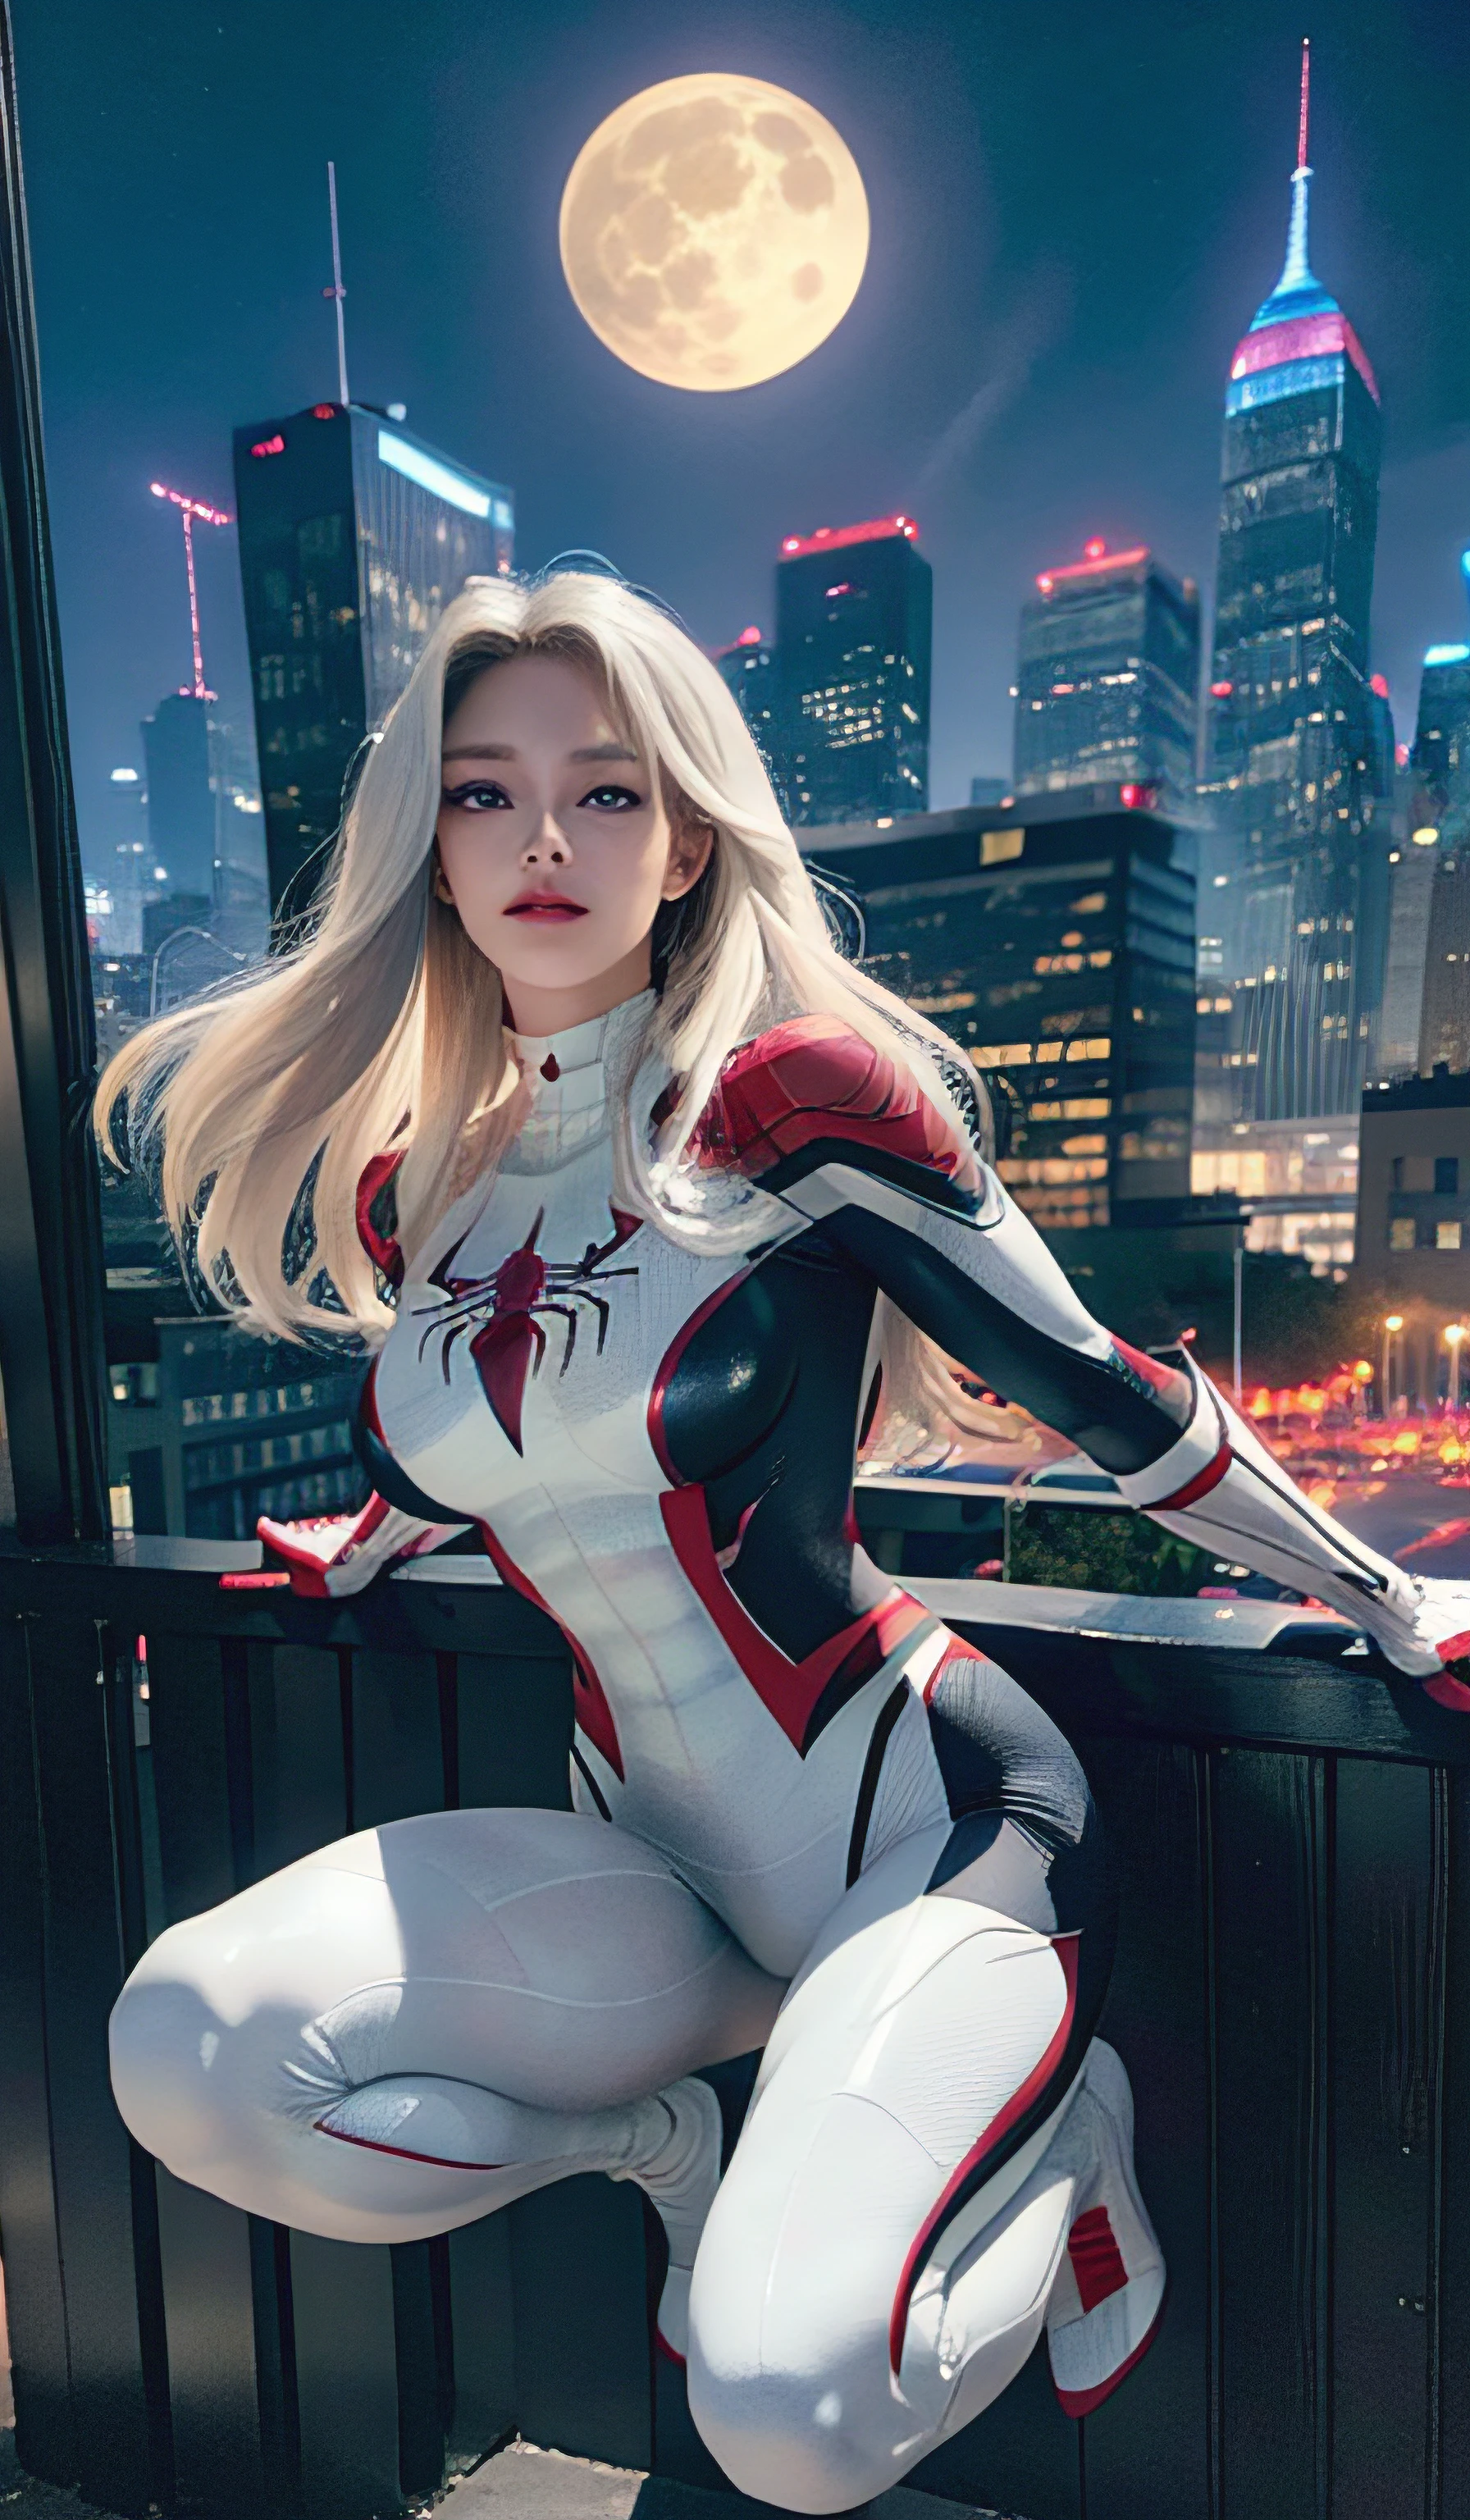 (Masterpiece, 4k resolution, ultra-realistic, very detailed), (White superhero theme, charismatic, there's a girl on top of town, wearing Spider-Man costume, she's a superhero), [ ((25 years), (long white hair:1.2), full body, (blue eyes:1.2), ((Spider-Man pose),show of strength, jumping from one building to another), ((sandy urban environment):0.8)| (cityscape, at night, dynamic lights), (full moon))] # Explanation: The Prompt mainly describes a 4K painting of ultra-high definition, very realistic, very detailed. It shows a superheroine at the top of the city, wearing a Spider-Man costume. The theme in the painting is a white superhero theme, the female protagonist has long white hair, is 25 years old and her entire body is shown in the painting. In terms of portraying the actions of superheroines, spiders are employed